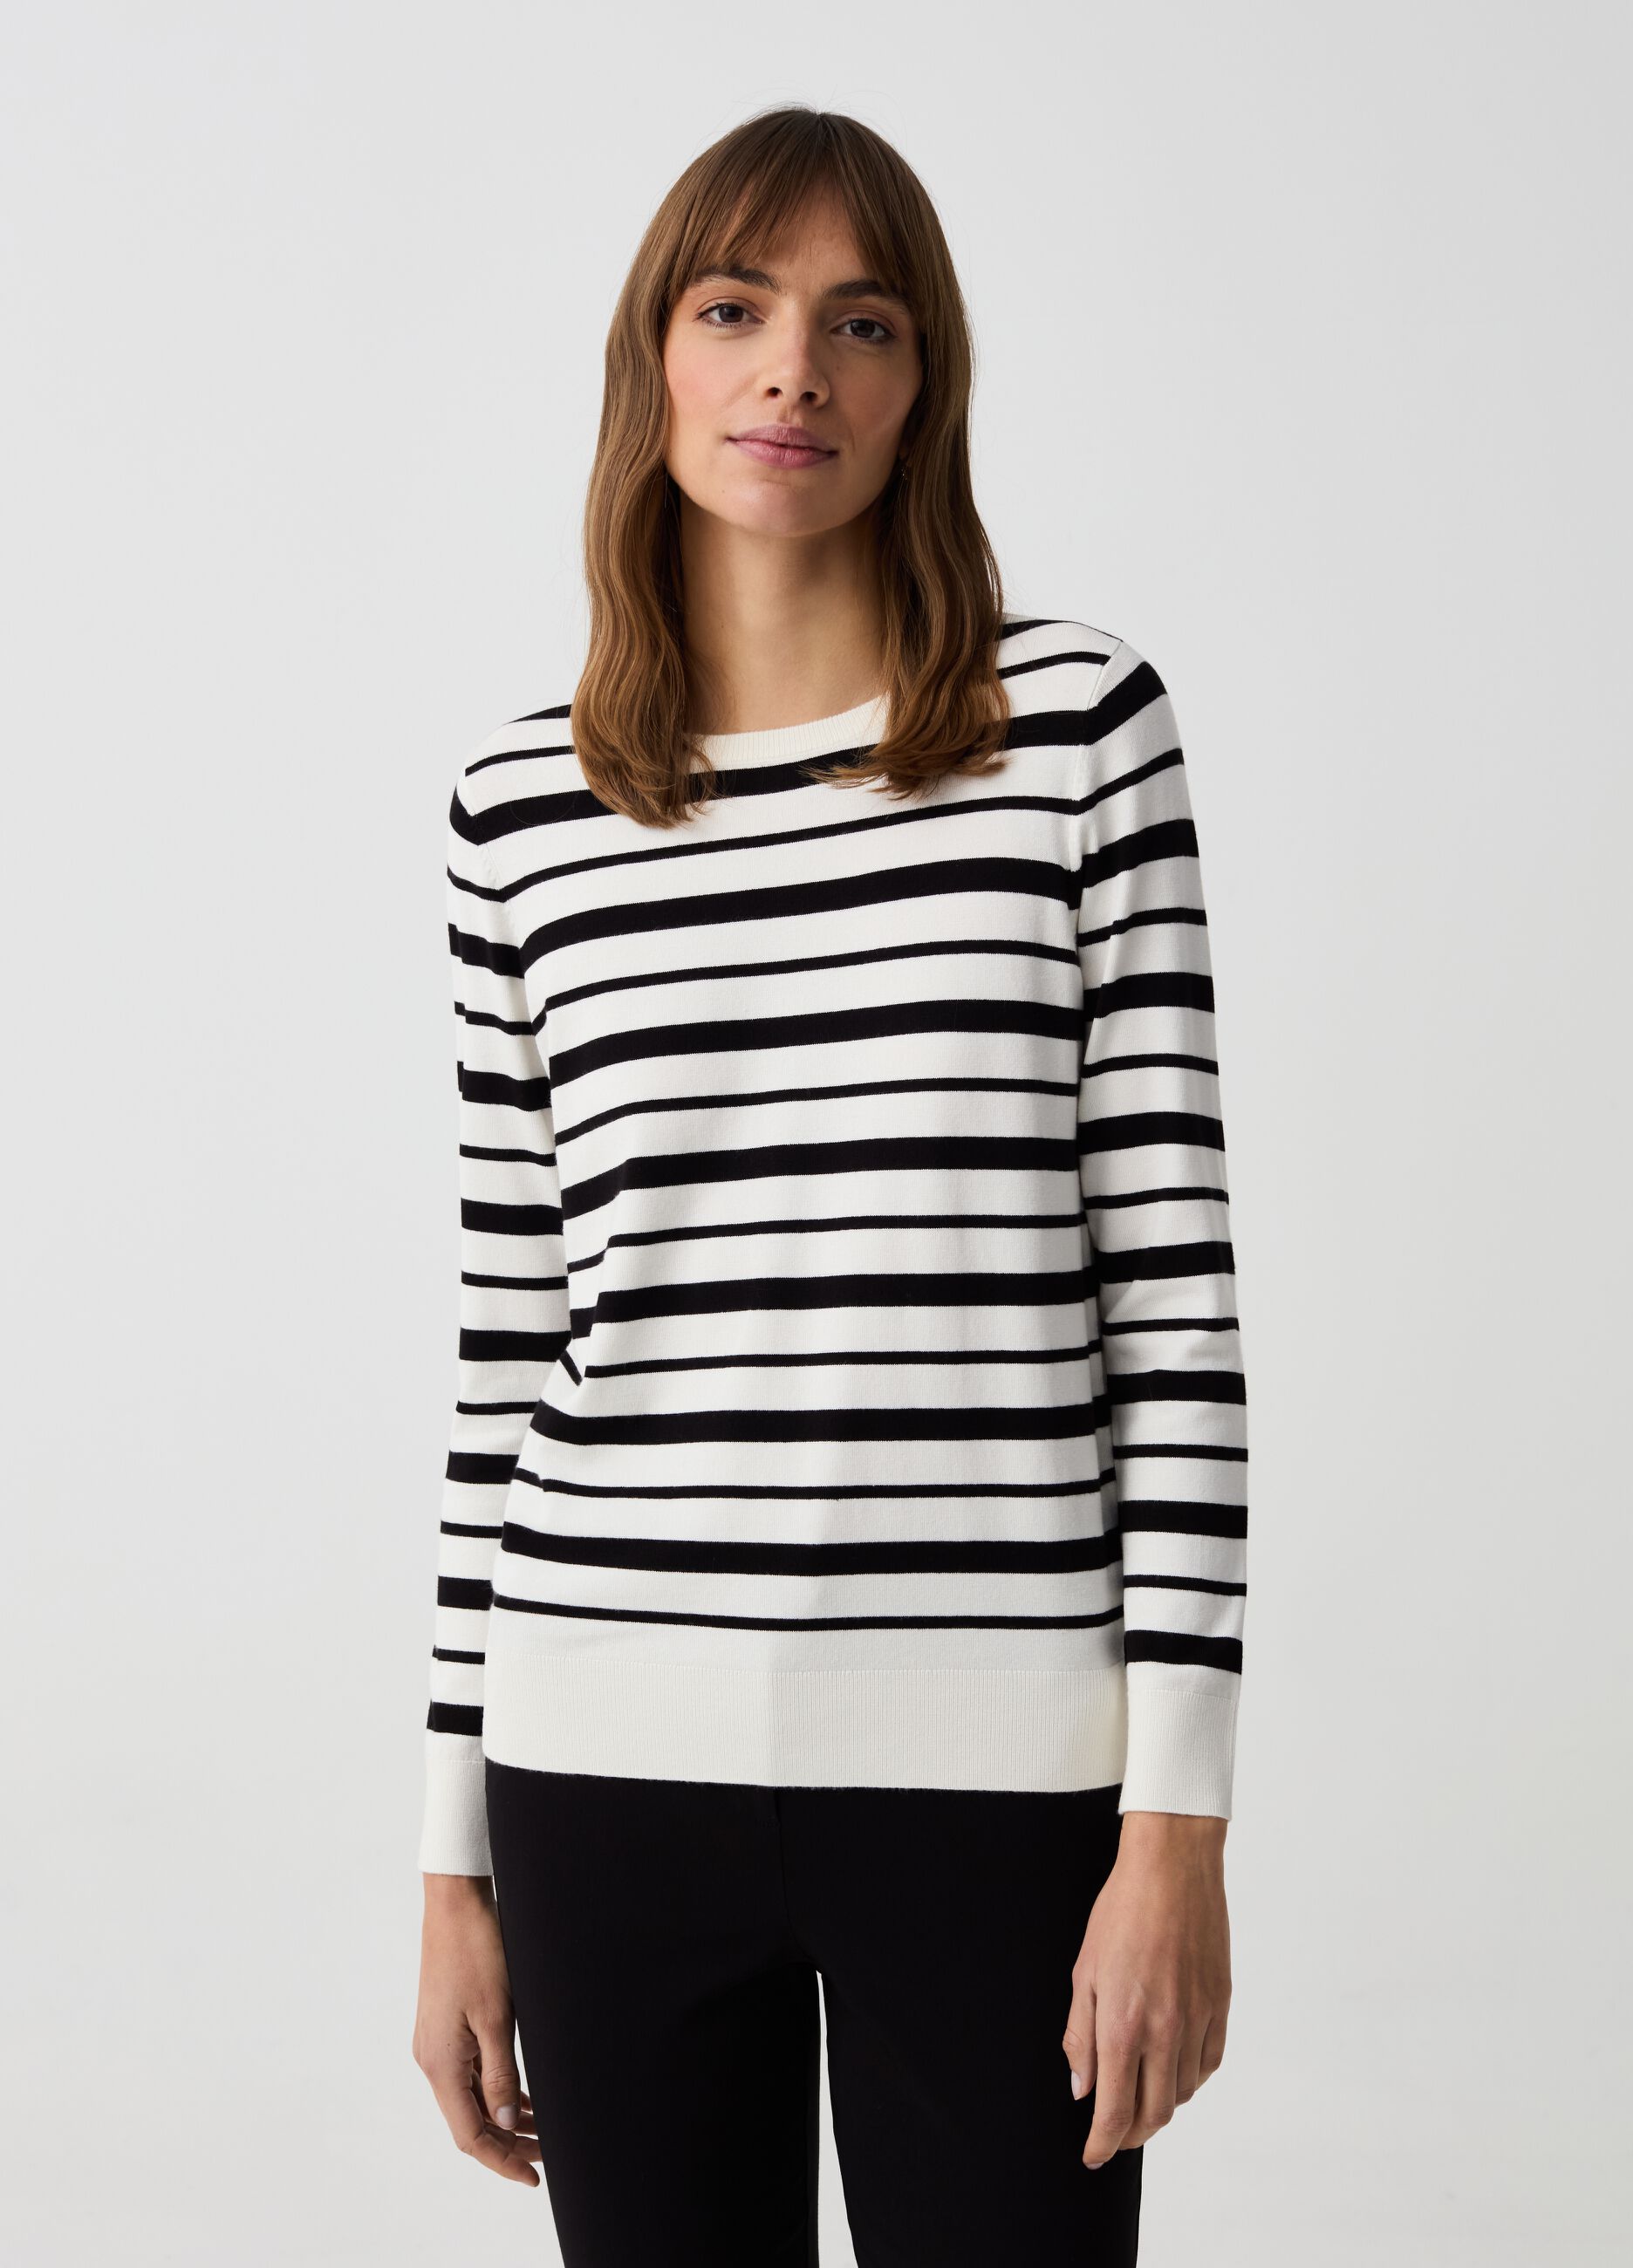 Striped top with long sleeves